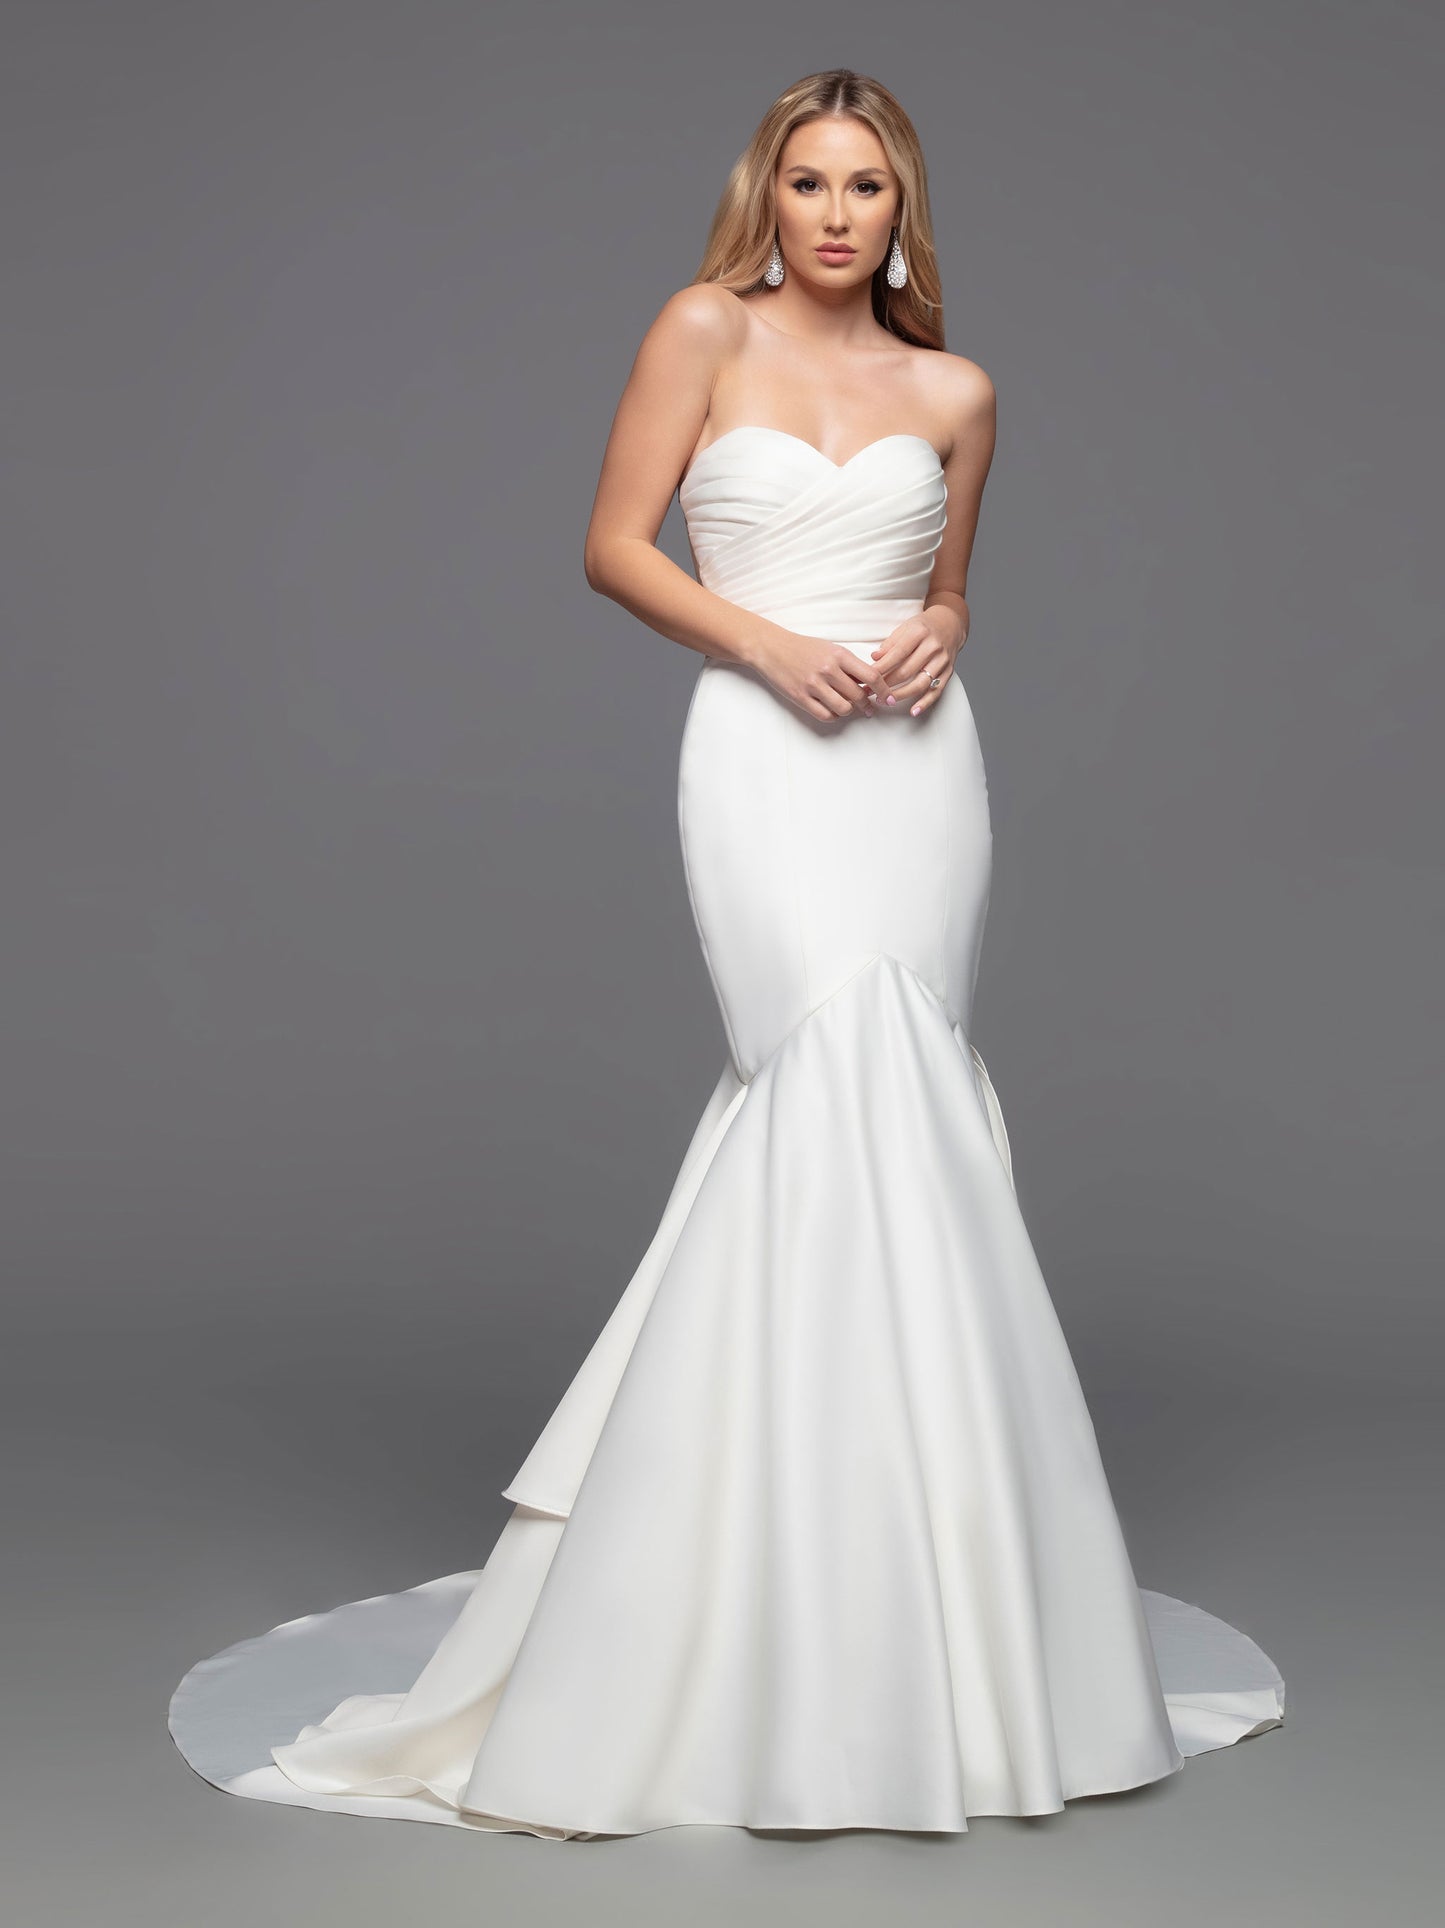 The Davinci Bridal 50808 Long fitted Strapless satin mermaid wedding dress boasts a beautiful modern design with a traditional flair. Its fit & flare silhouette is enhanced by an opaque ruched front bodice and a romantic ruffled mermaid skirt with a sheer back bodice. This stylish design is finished with covered buttons and a tiered back skirt, culminating in a chapel train.  Sizes: 2-20  Colors: Ivory, White